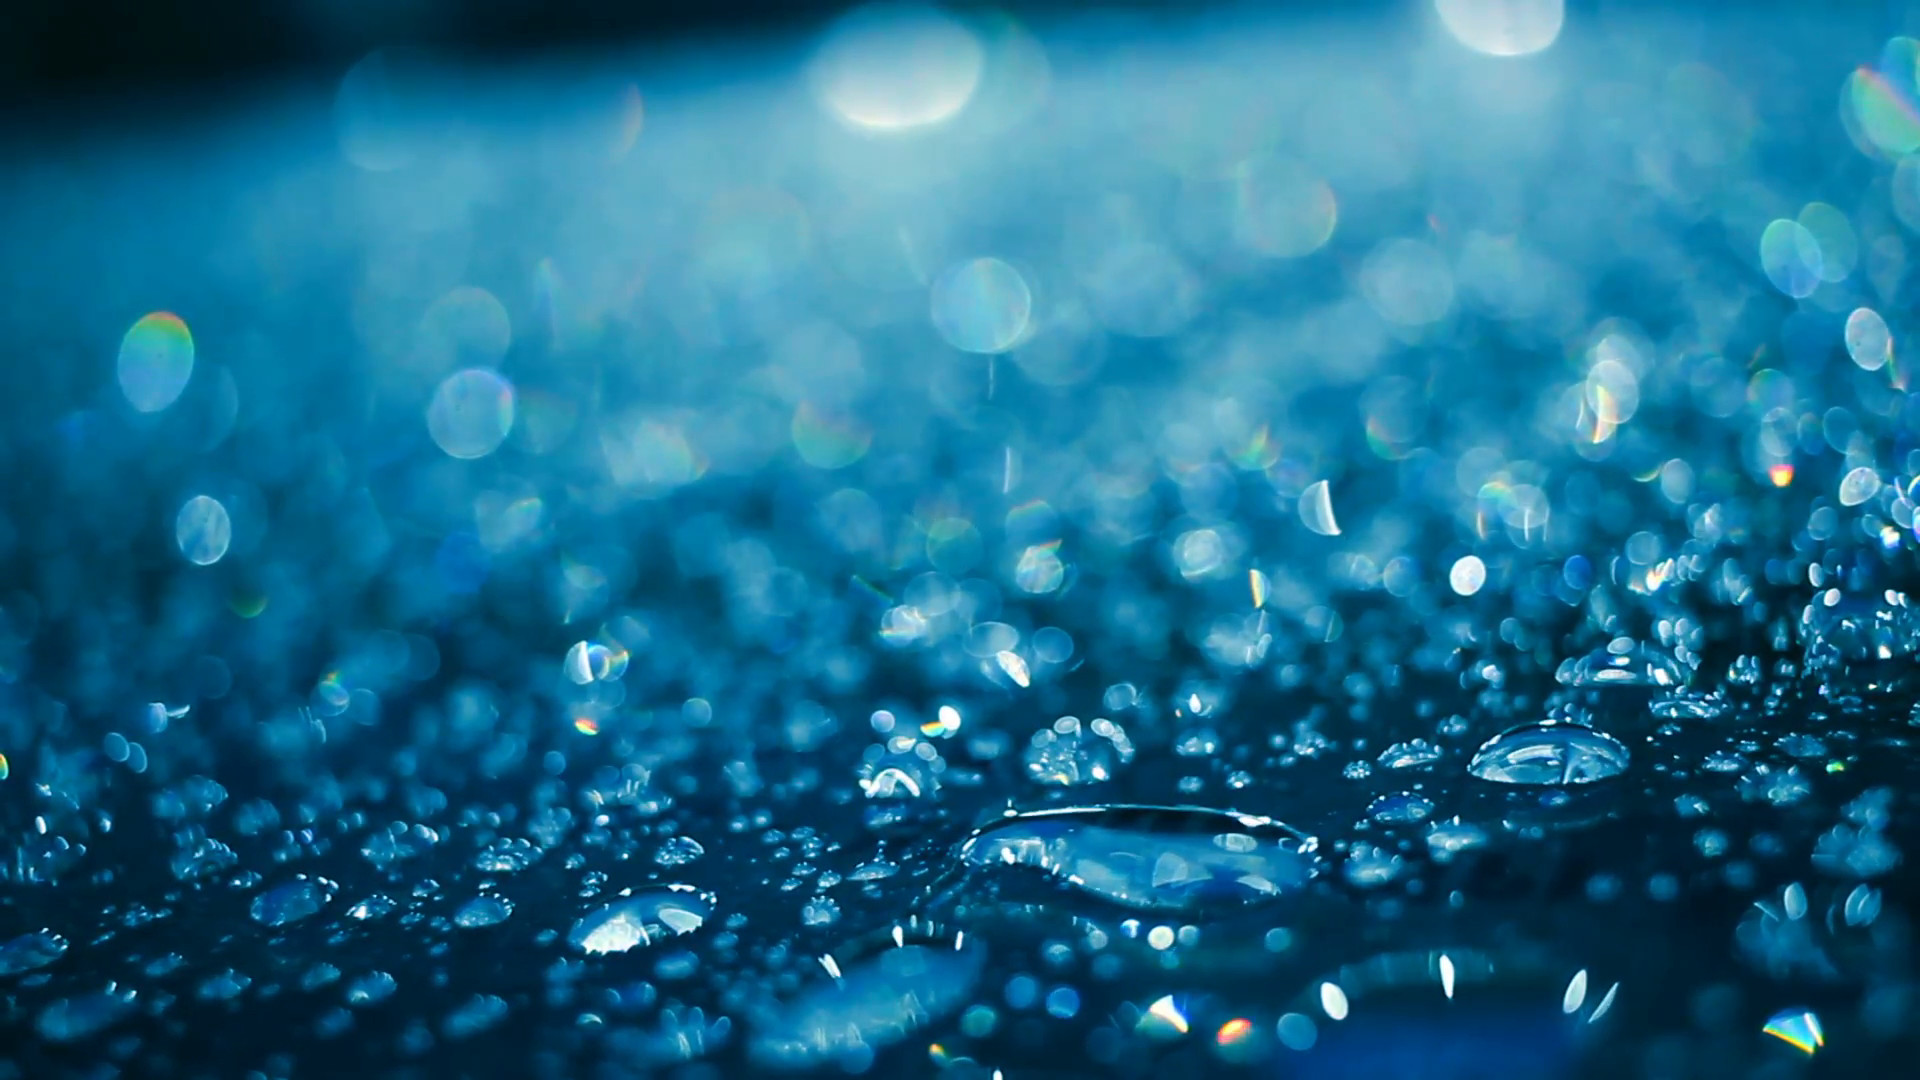 Water Droplets On Glass In Blue Color - Background Image Rain Drops - HD Wallpaper 